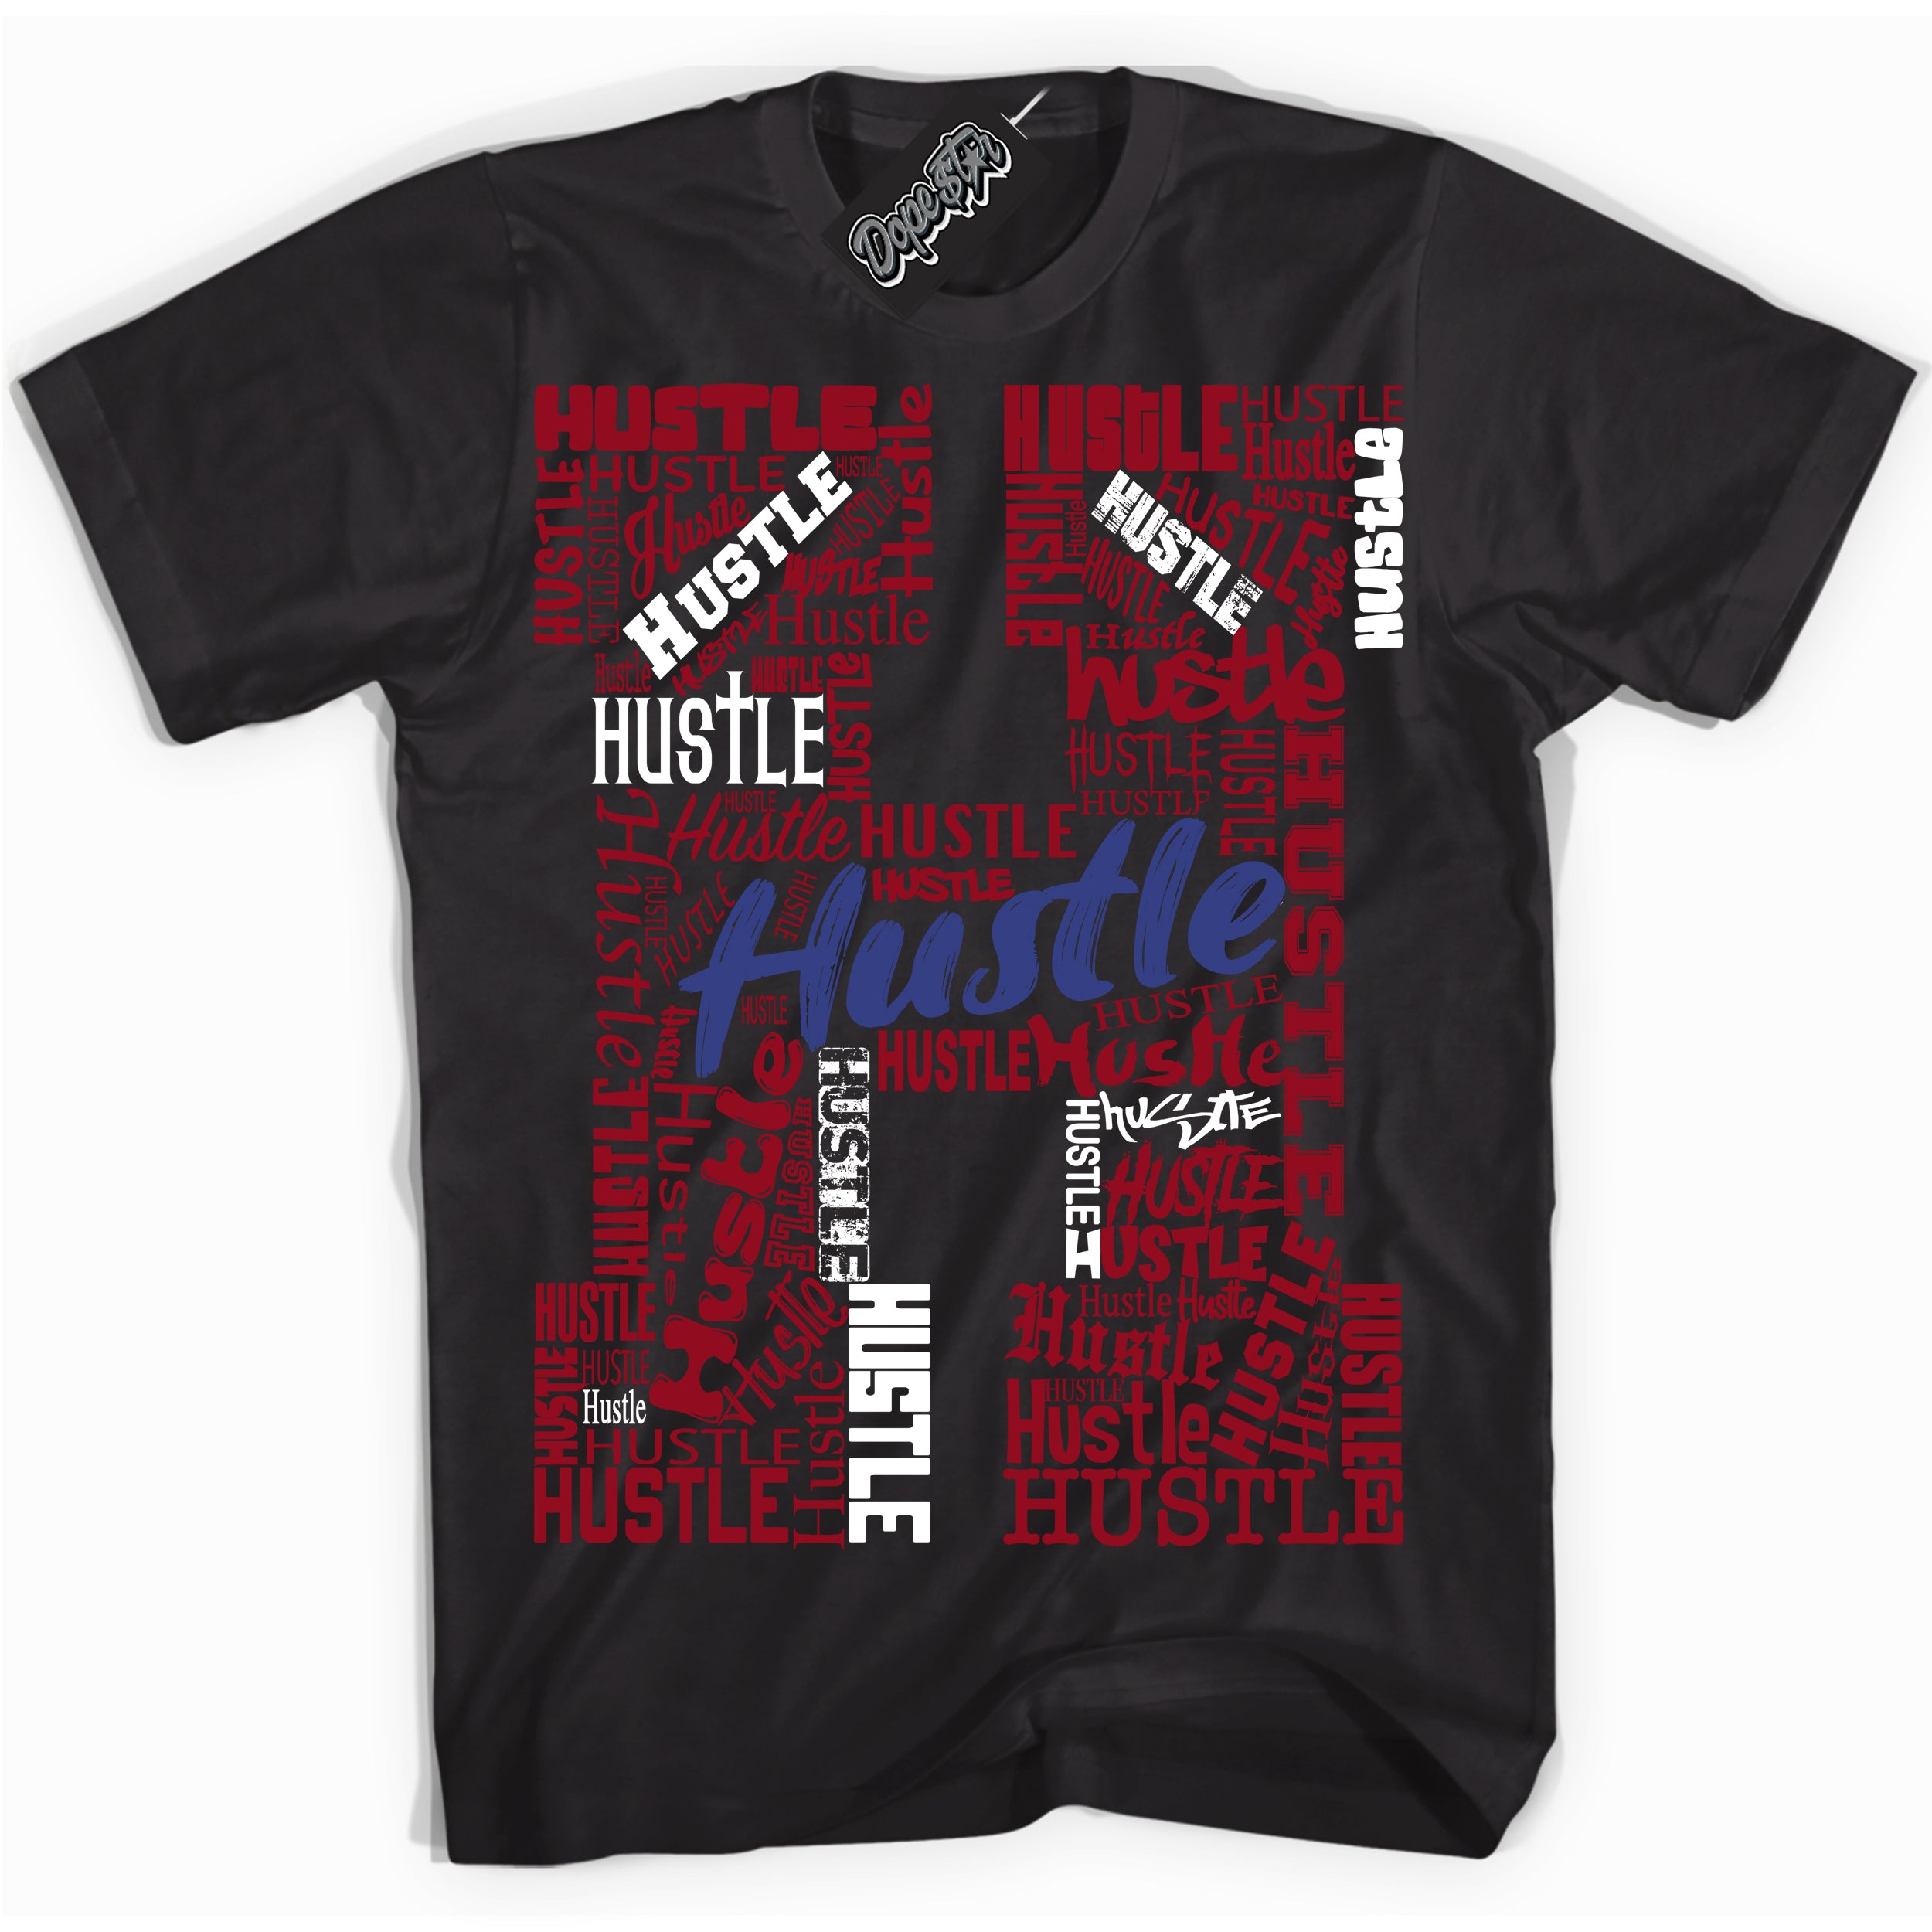 Cool Black Shirt with “ Hustle H ” design that perfectly matches Playoffs 8s Sneakers.